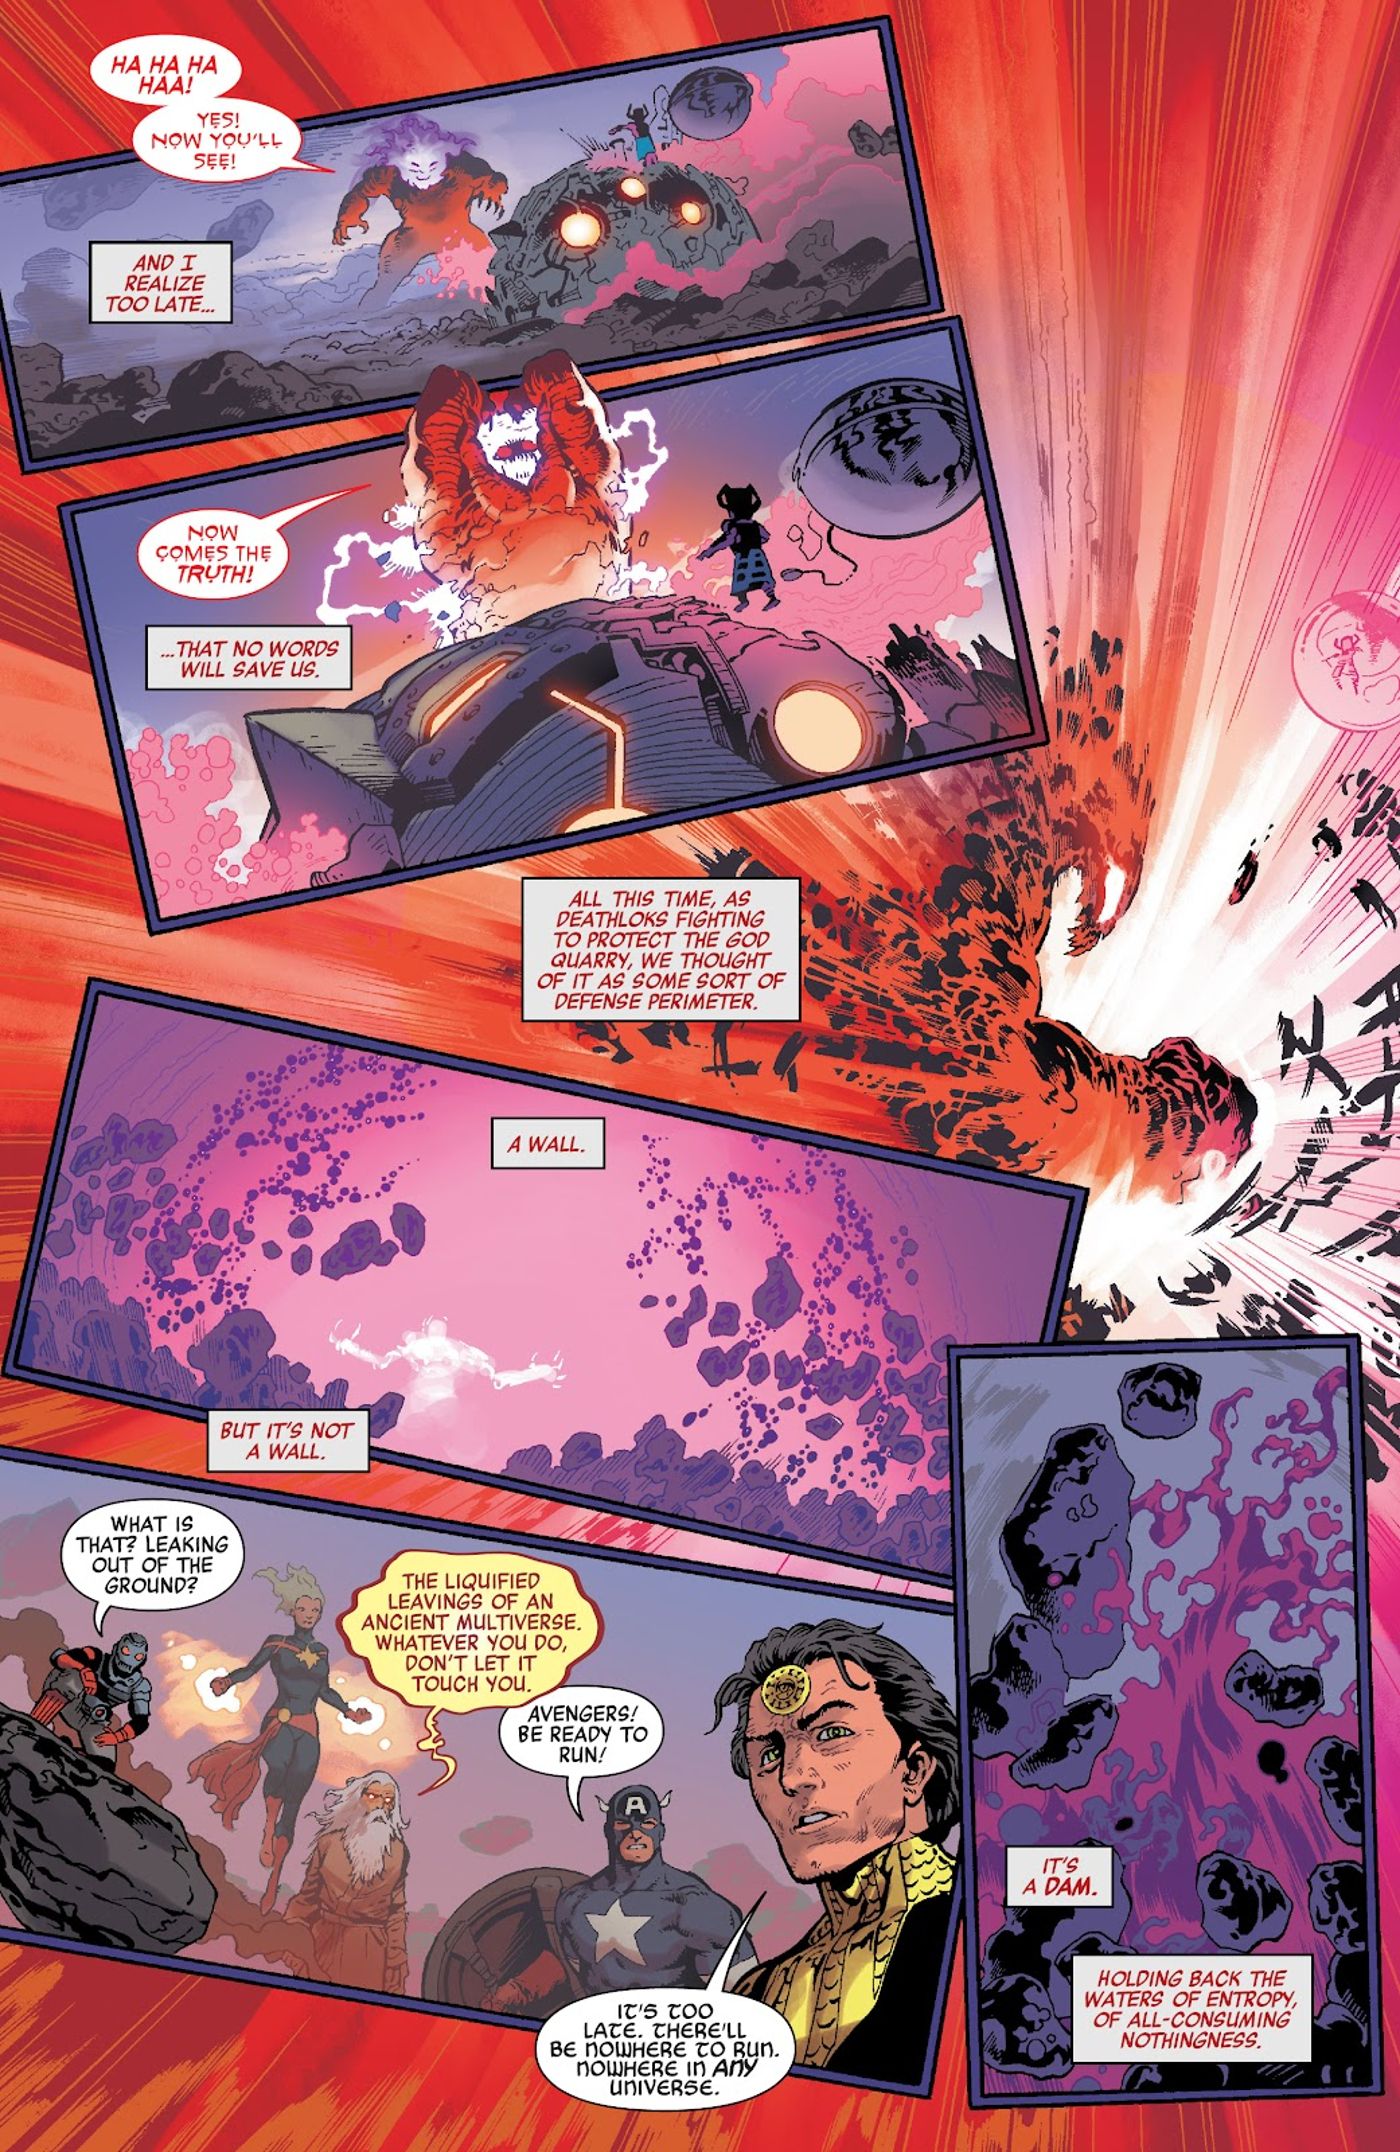 Mephisto destroys the Quarry of Creation in Avengers Forever